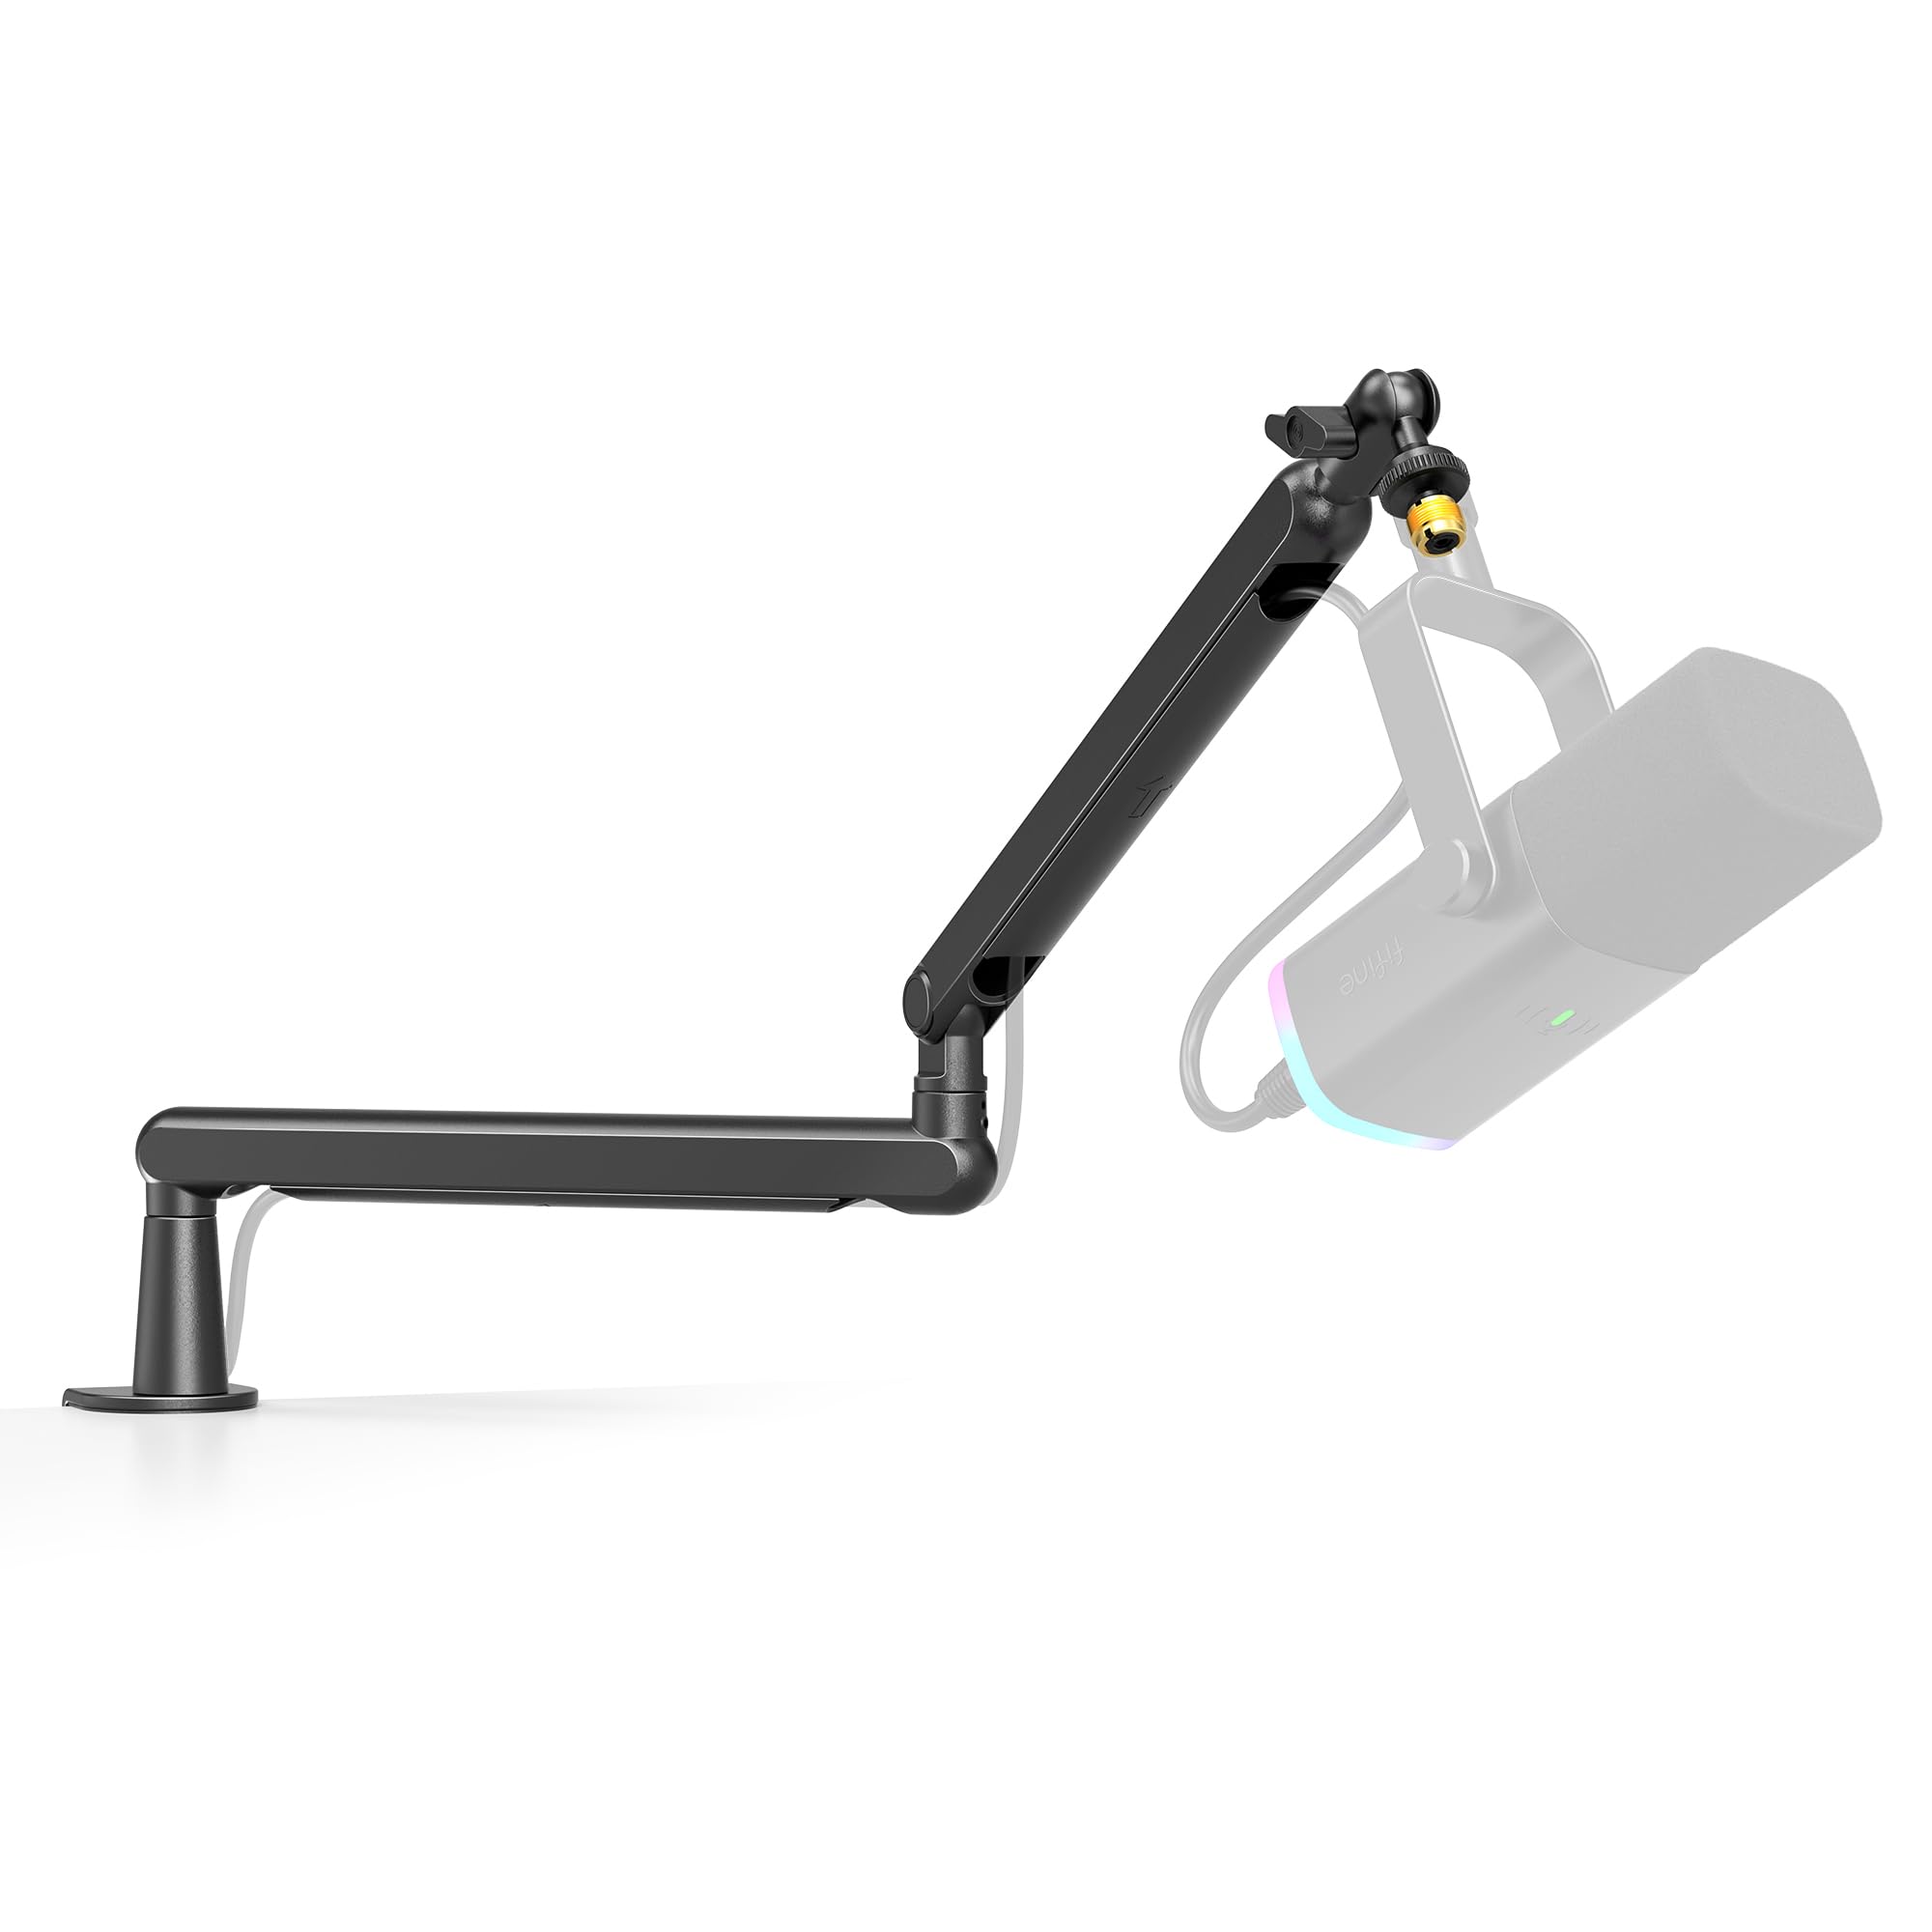 Fifine Low Profile Microphone Arm Boom (Black) $42.39 + Free Shipping